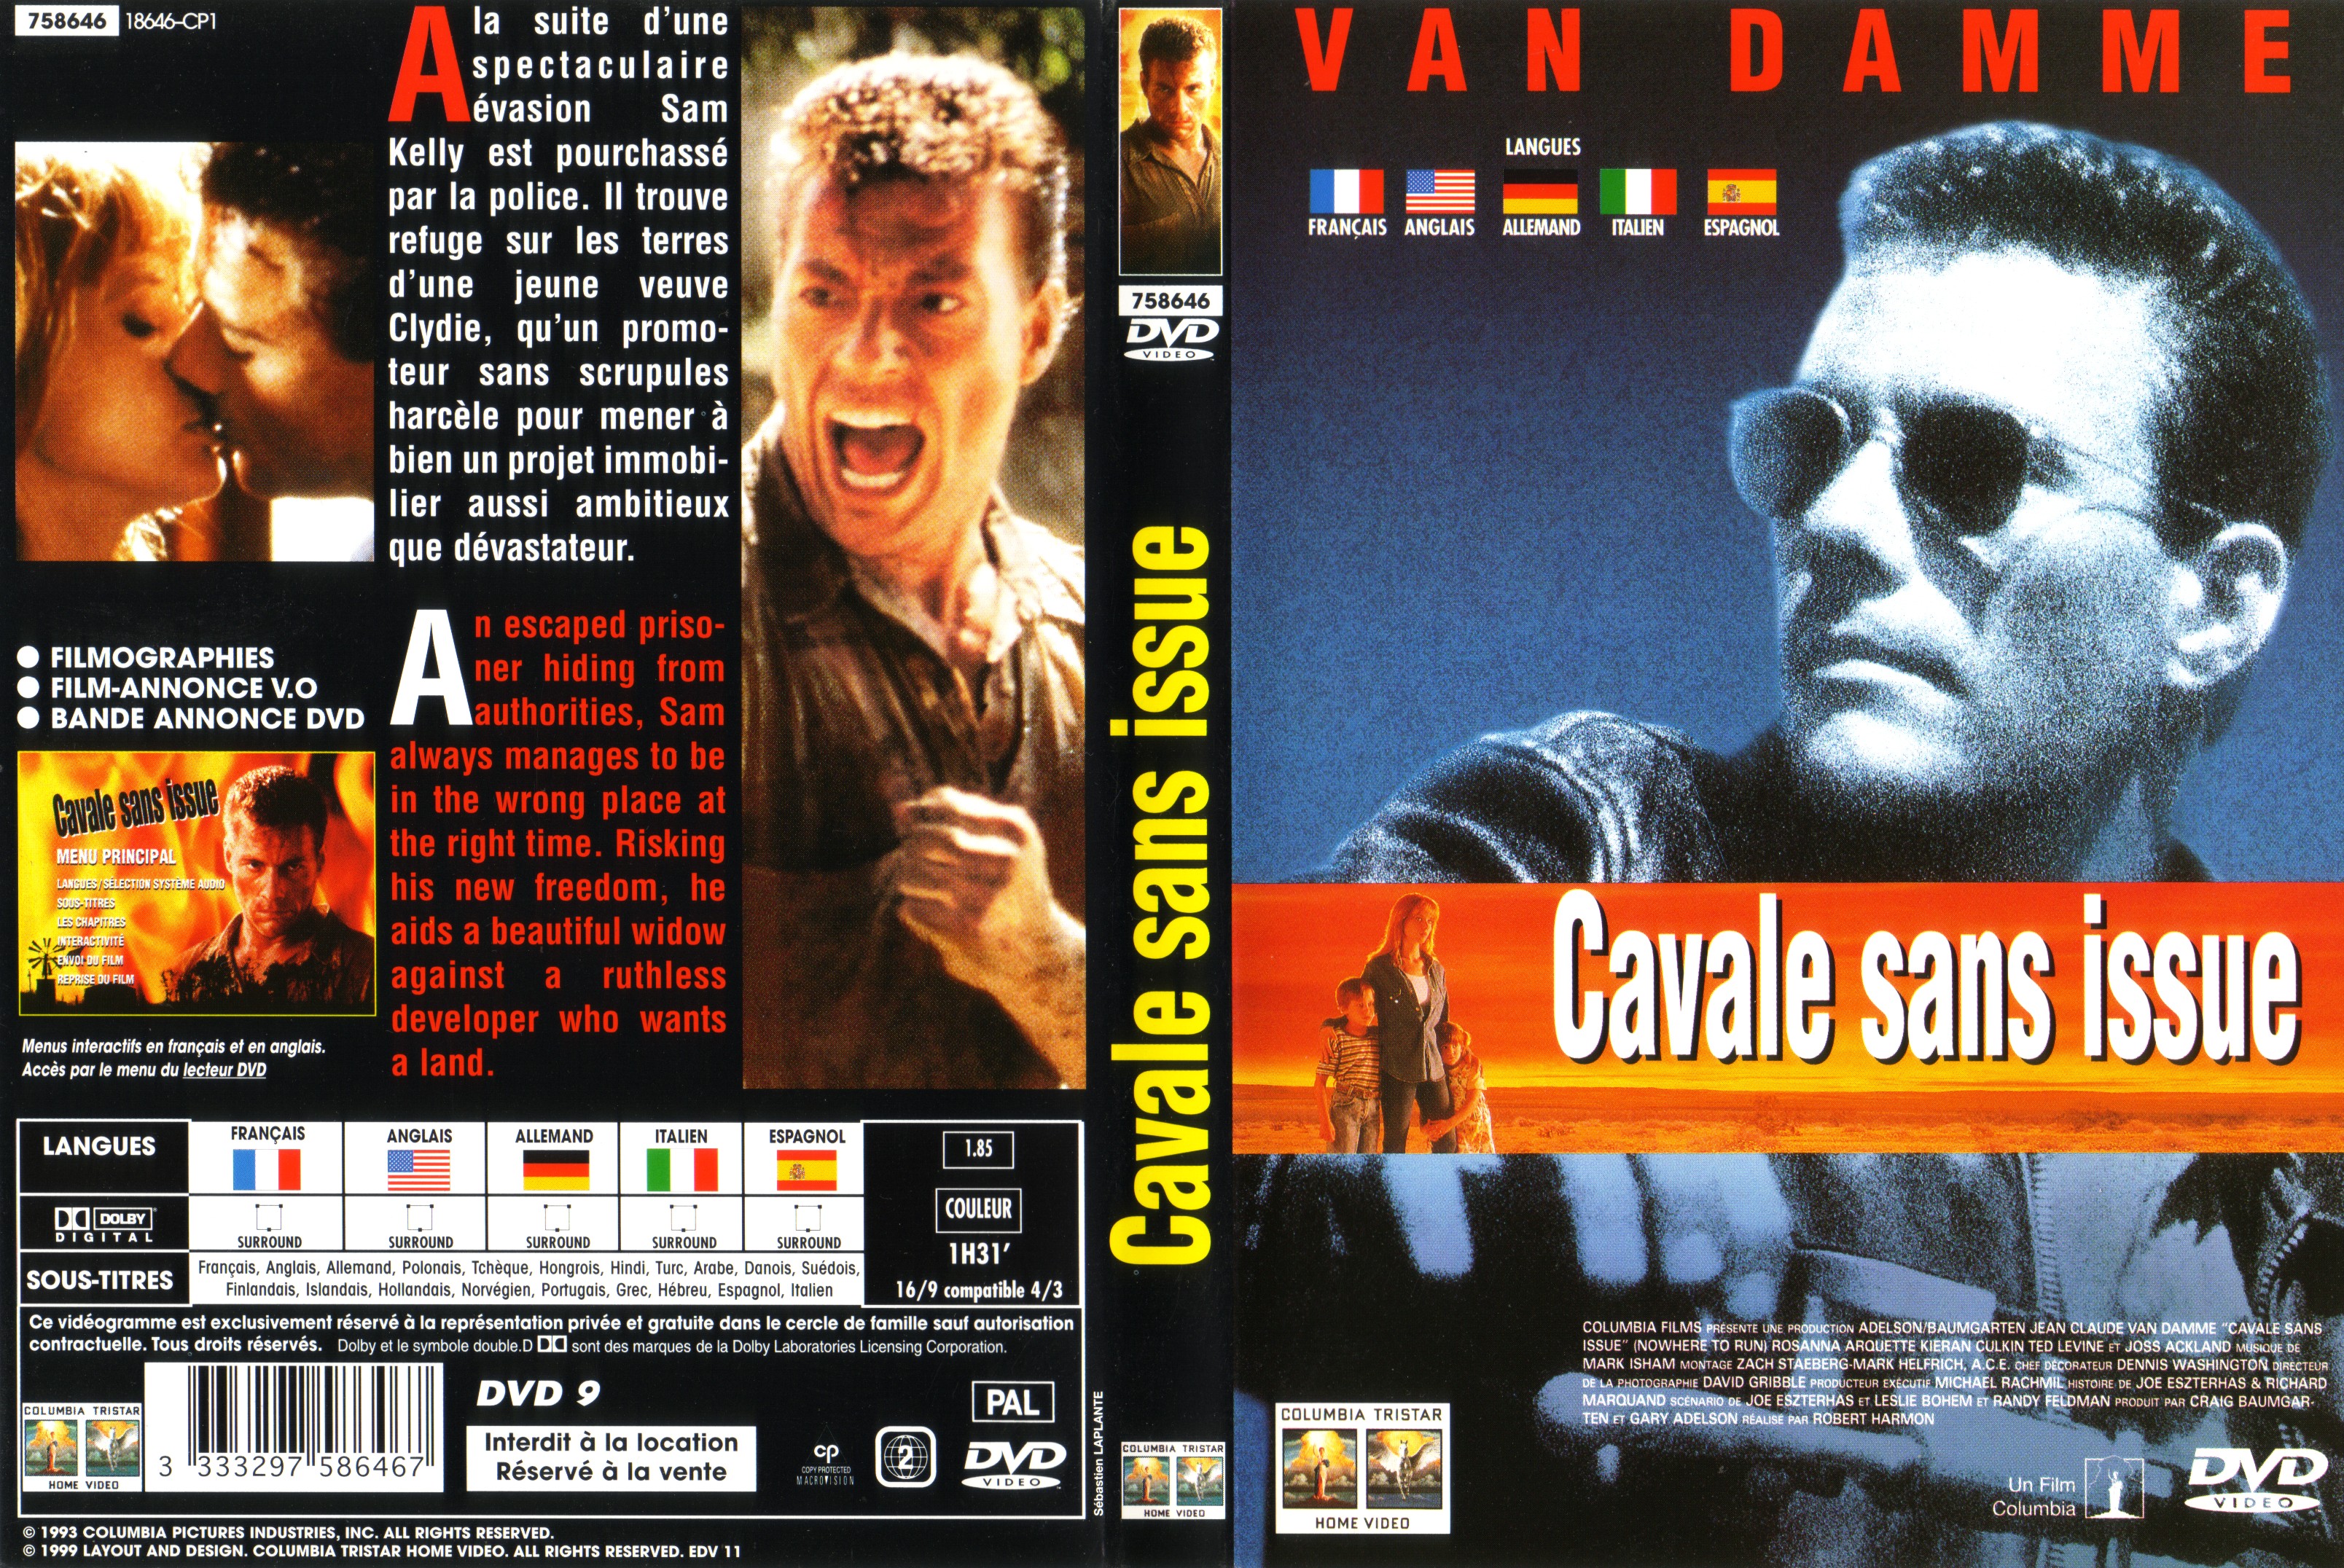 Jaquette DVD Cavale sans issue v3